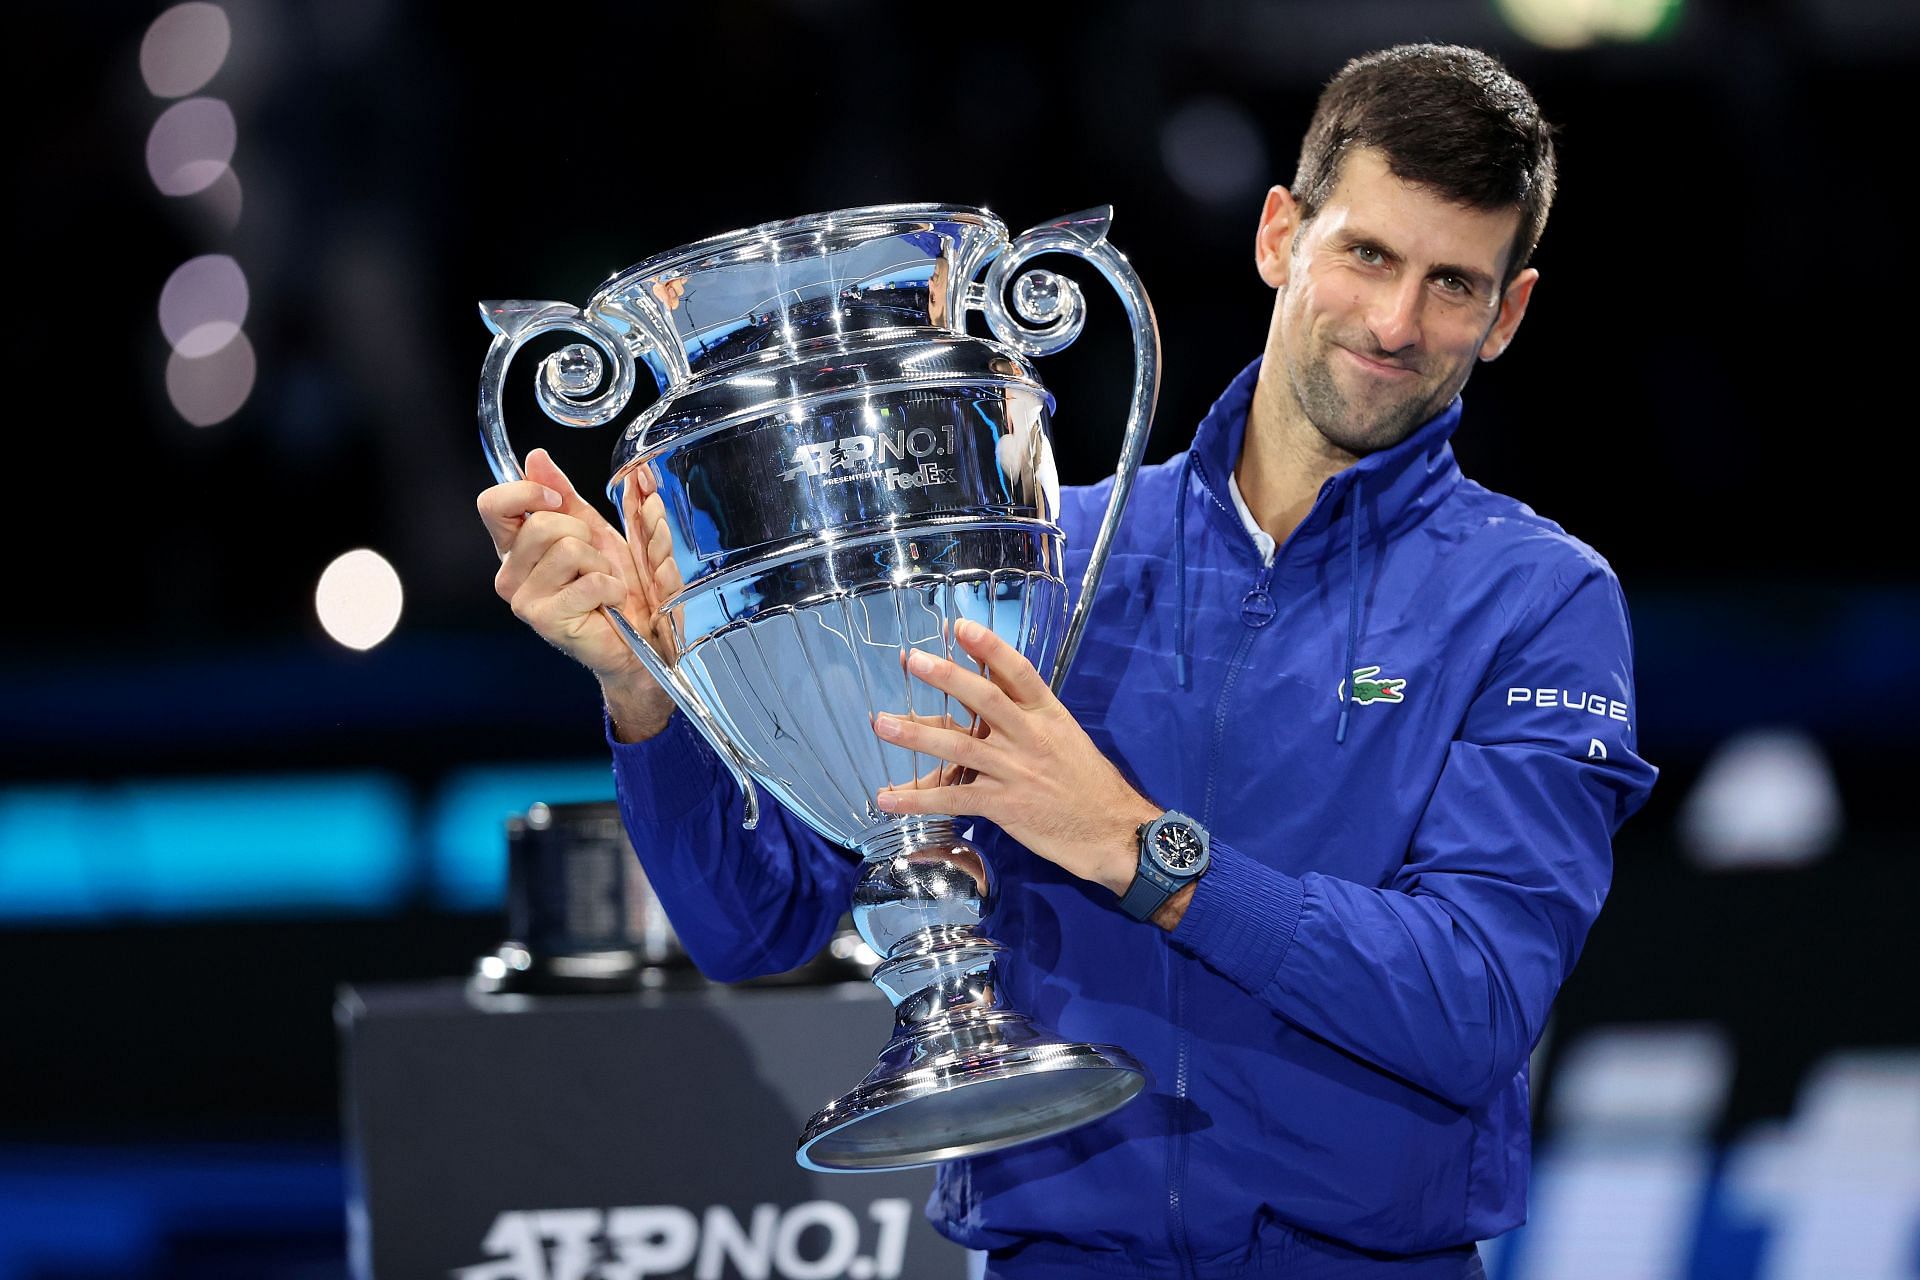 Novak Djokovic holds his Year-End No. 1 trophy at the Nitto ATP Finals.